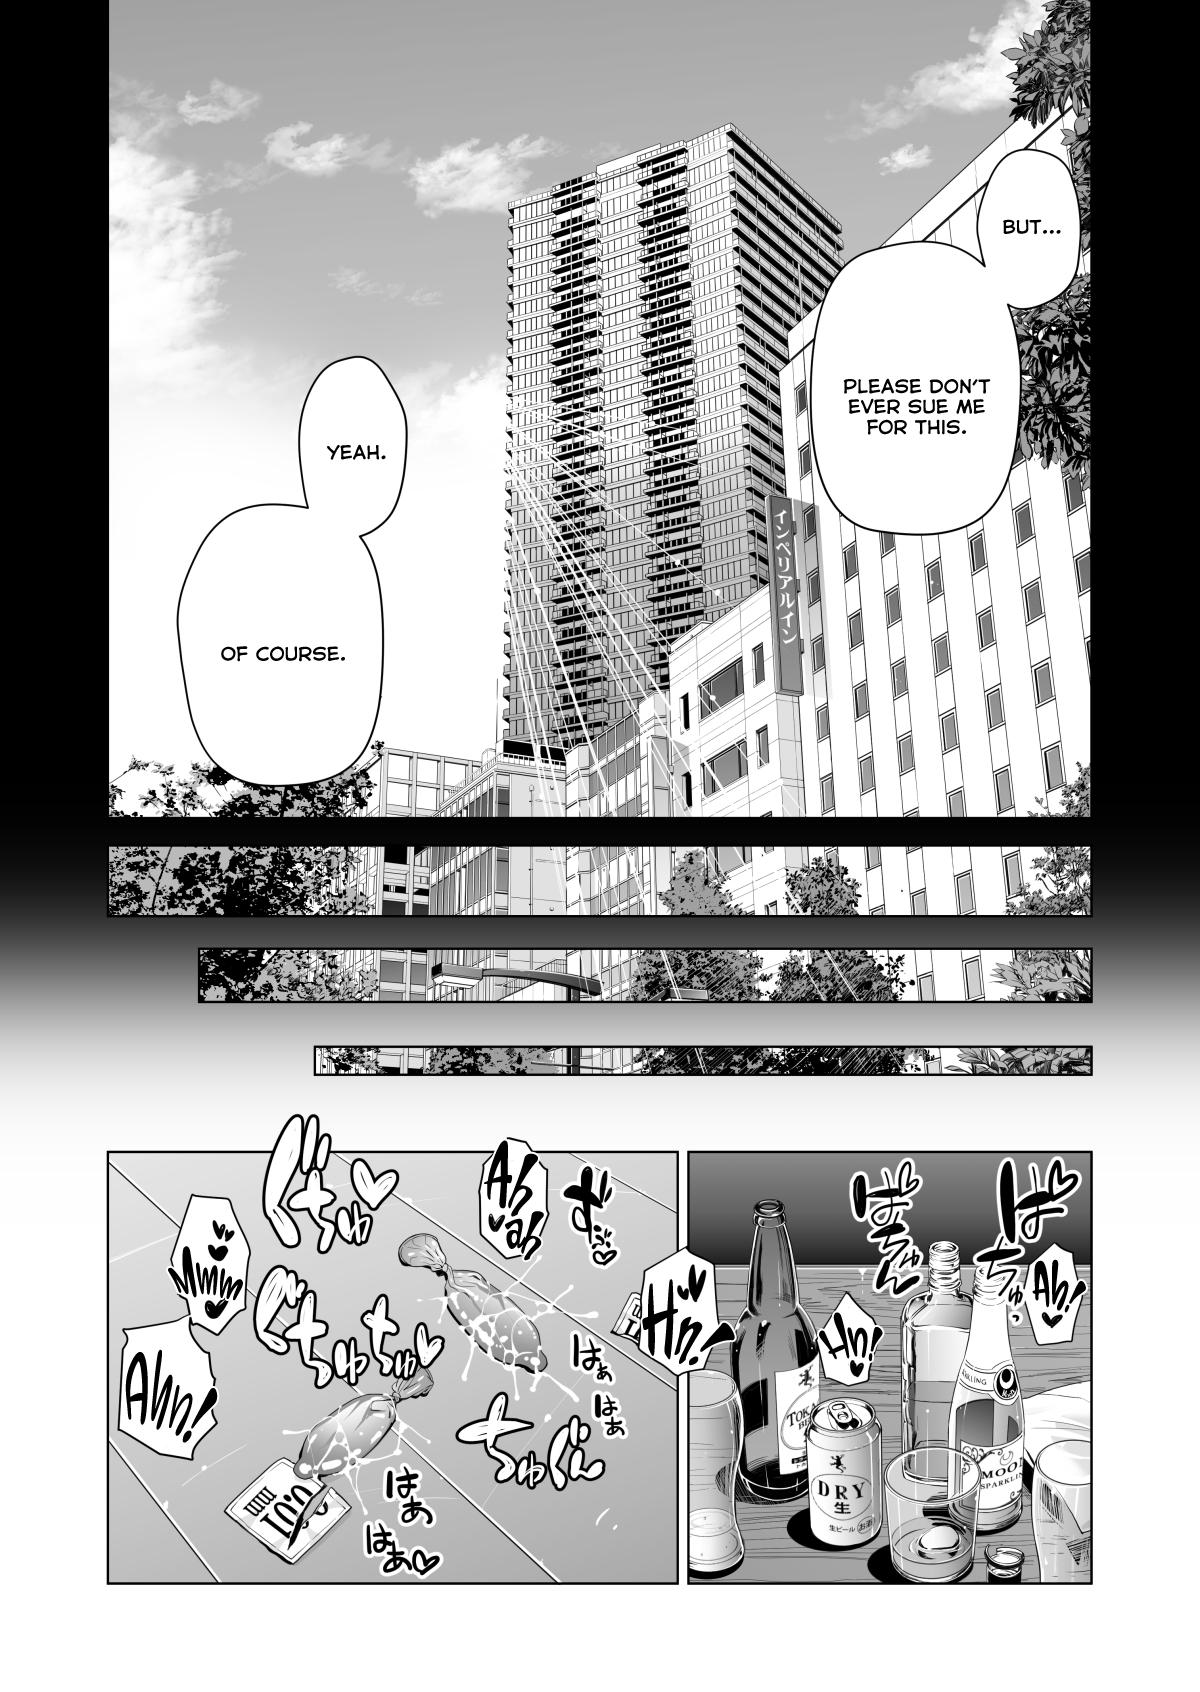 [HGT Lab (Tsusauto)] Tsukiyo no Midare Zake (Kouhen) Moonlit Intoxication ~ A Housewife Stolen by a Coworker Besides her Blackout Drunk Husband ~ Chapter 2 [English] 48